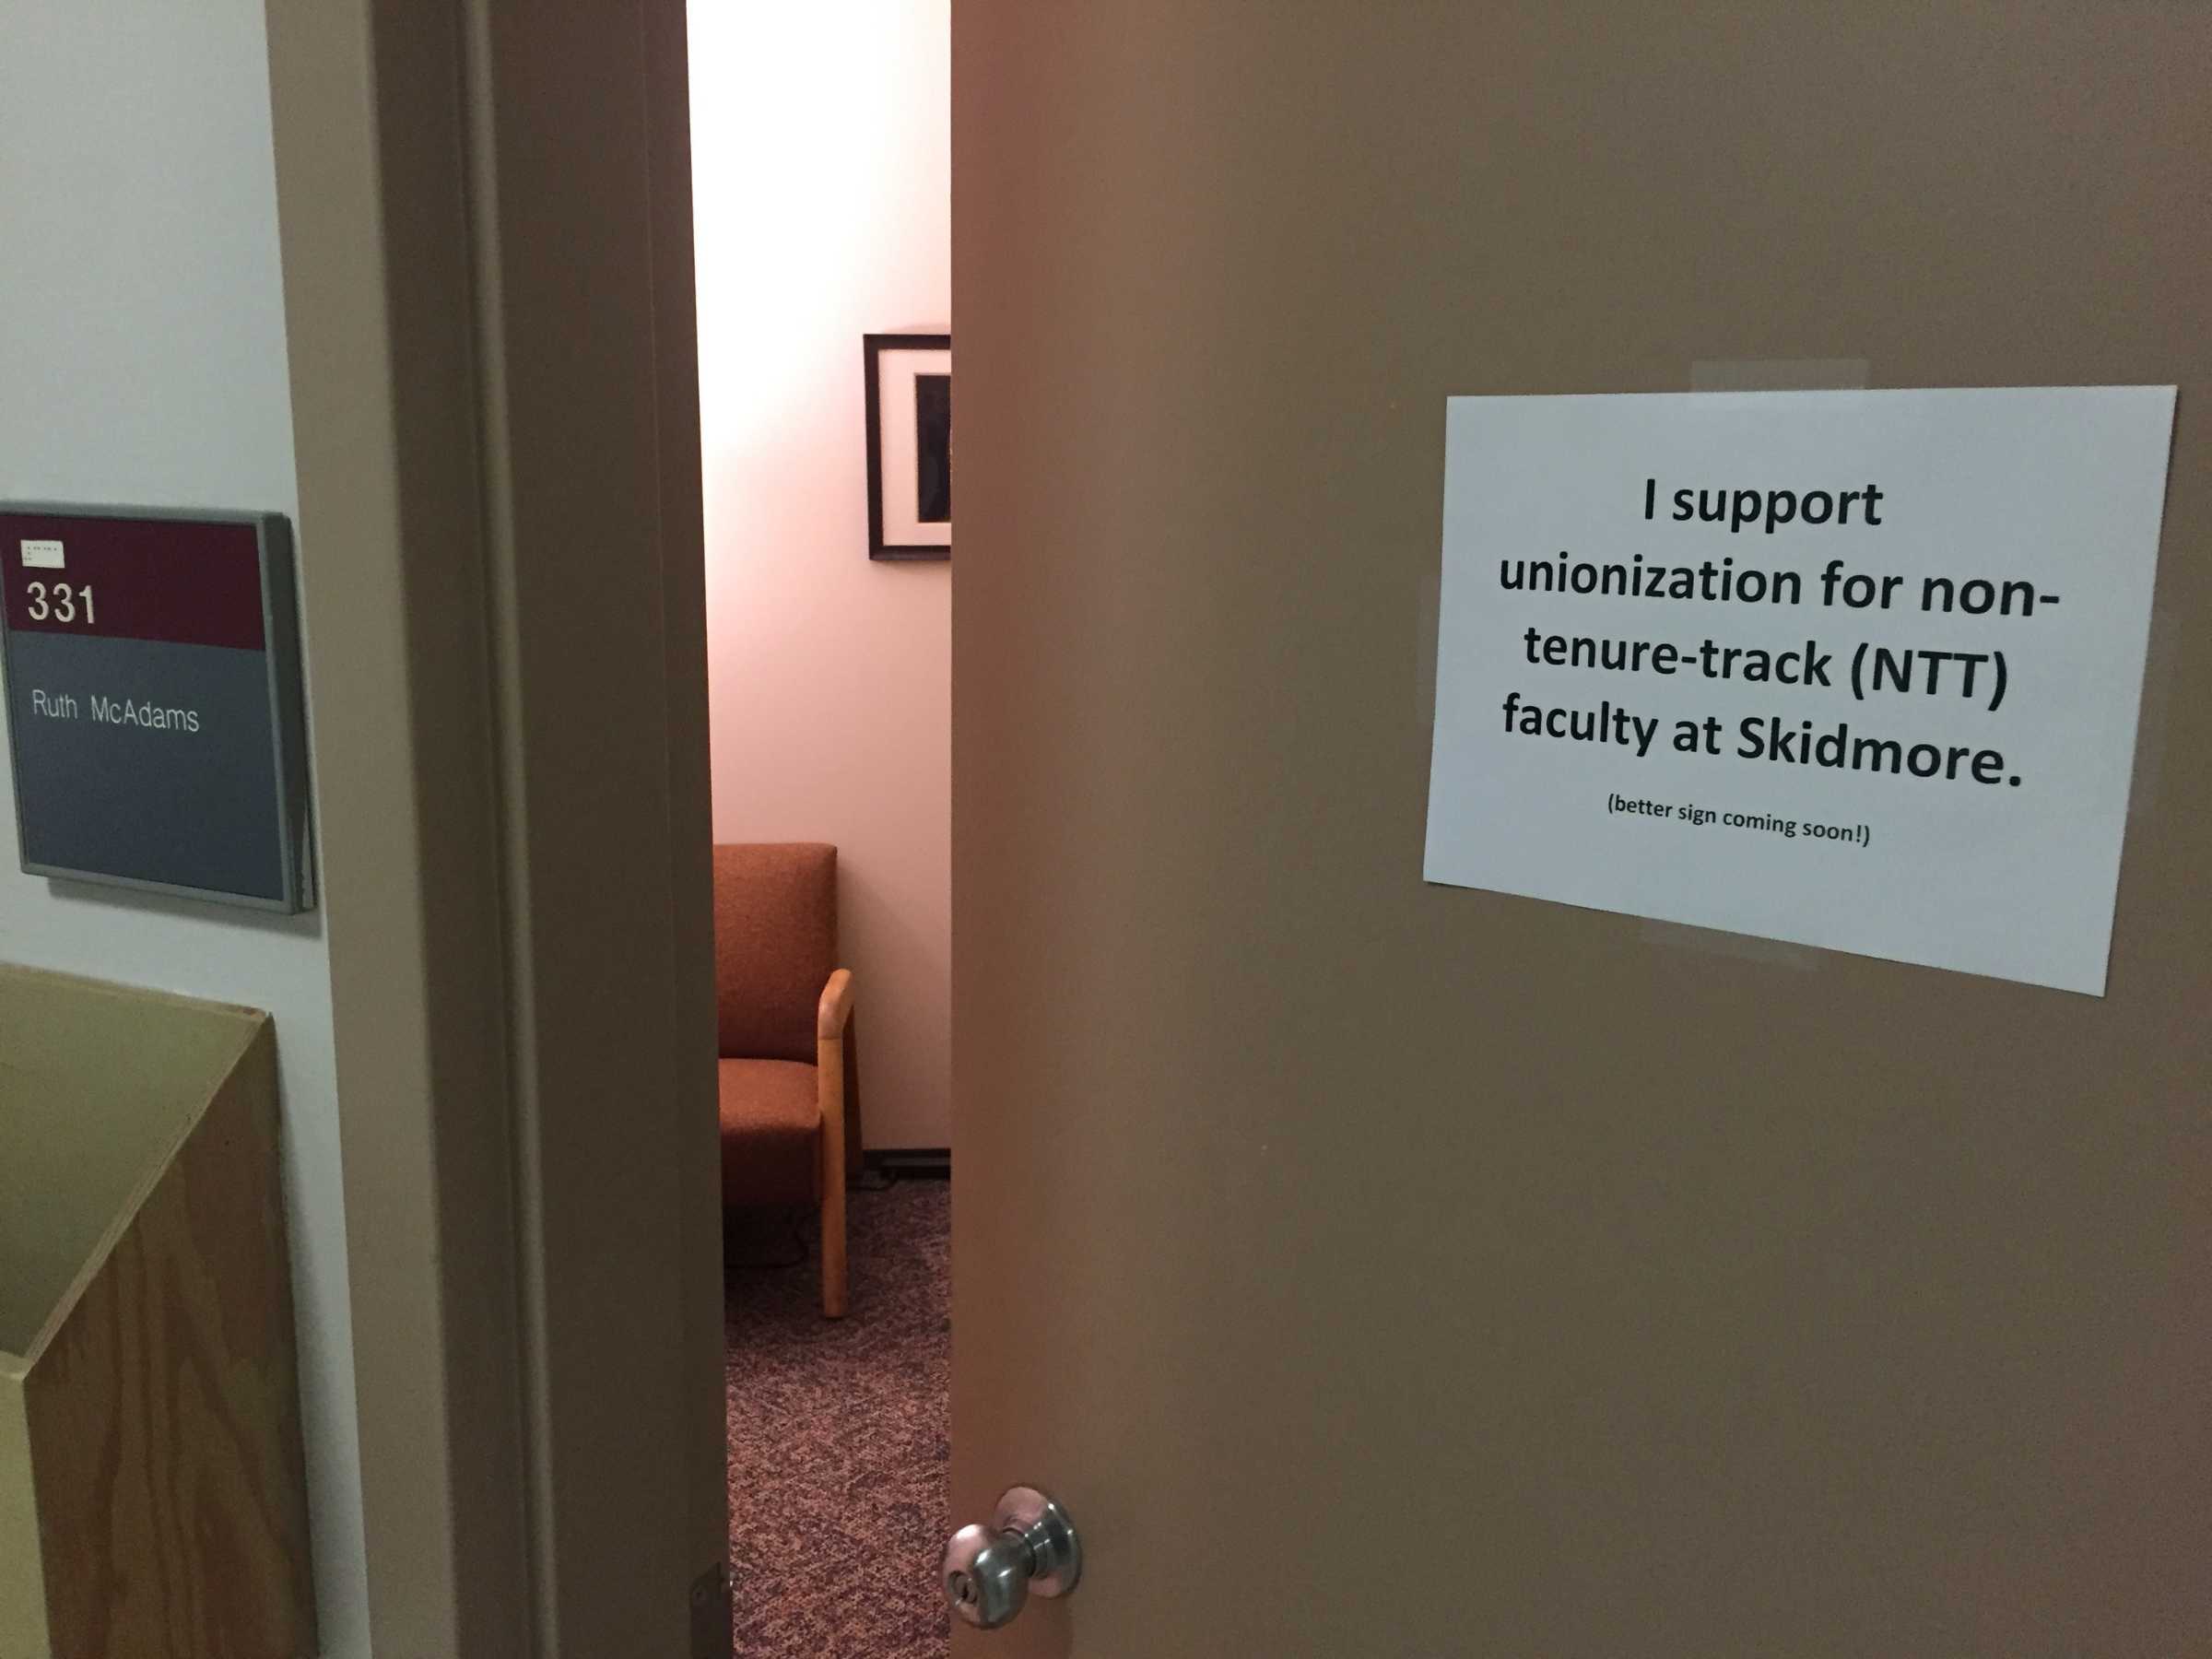 Photograph of Ruth's office door with sign supporting unionisation at Skidmore College